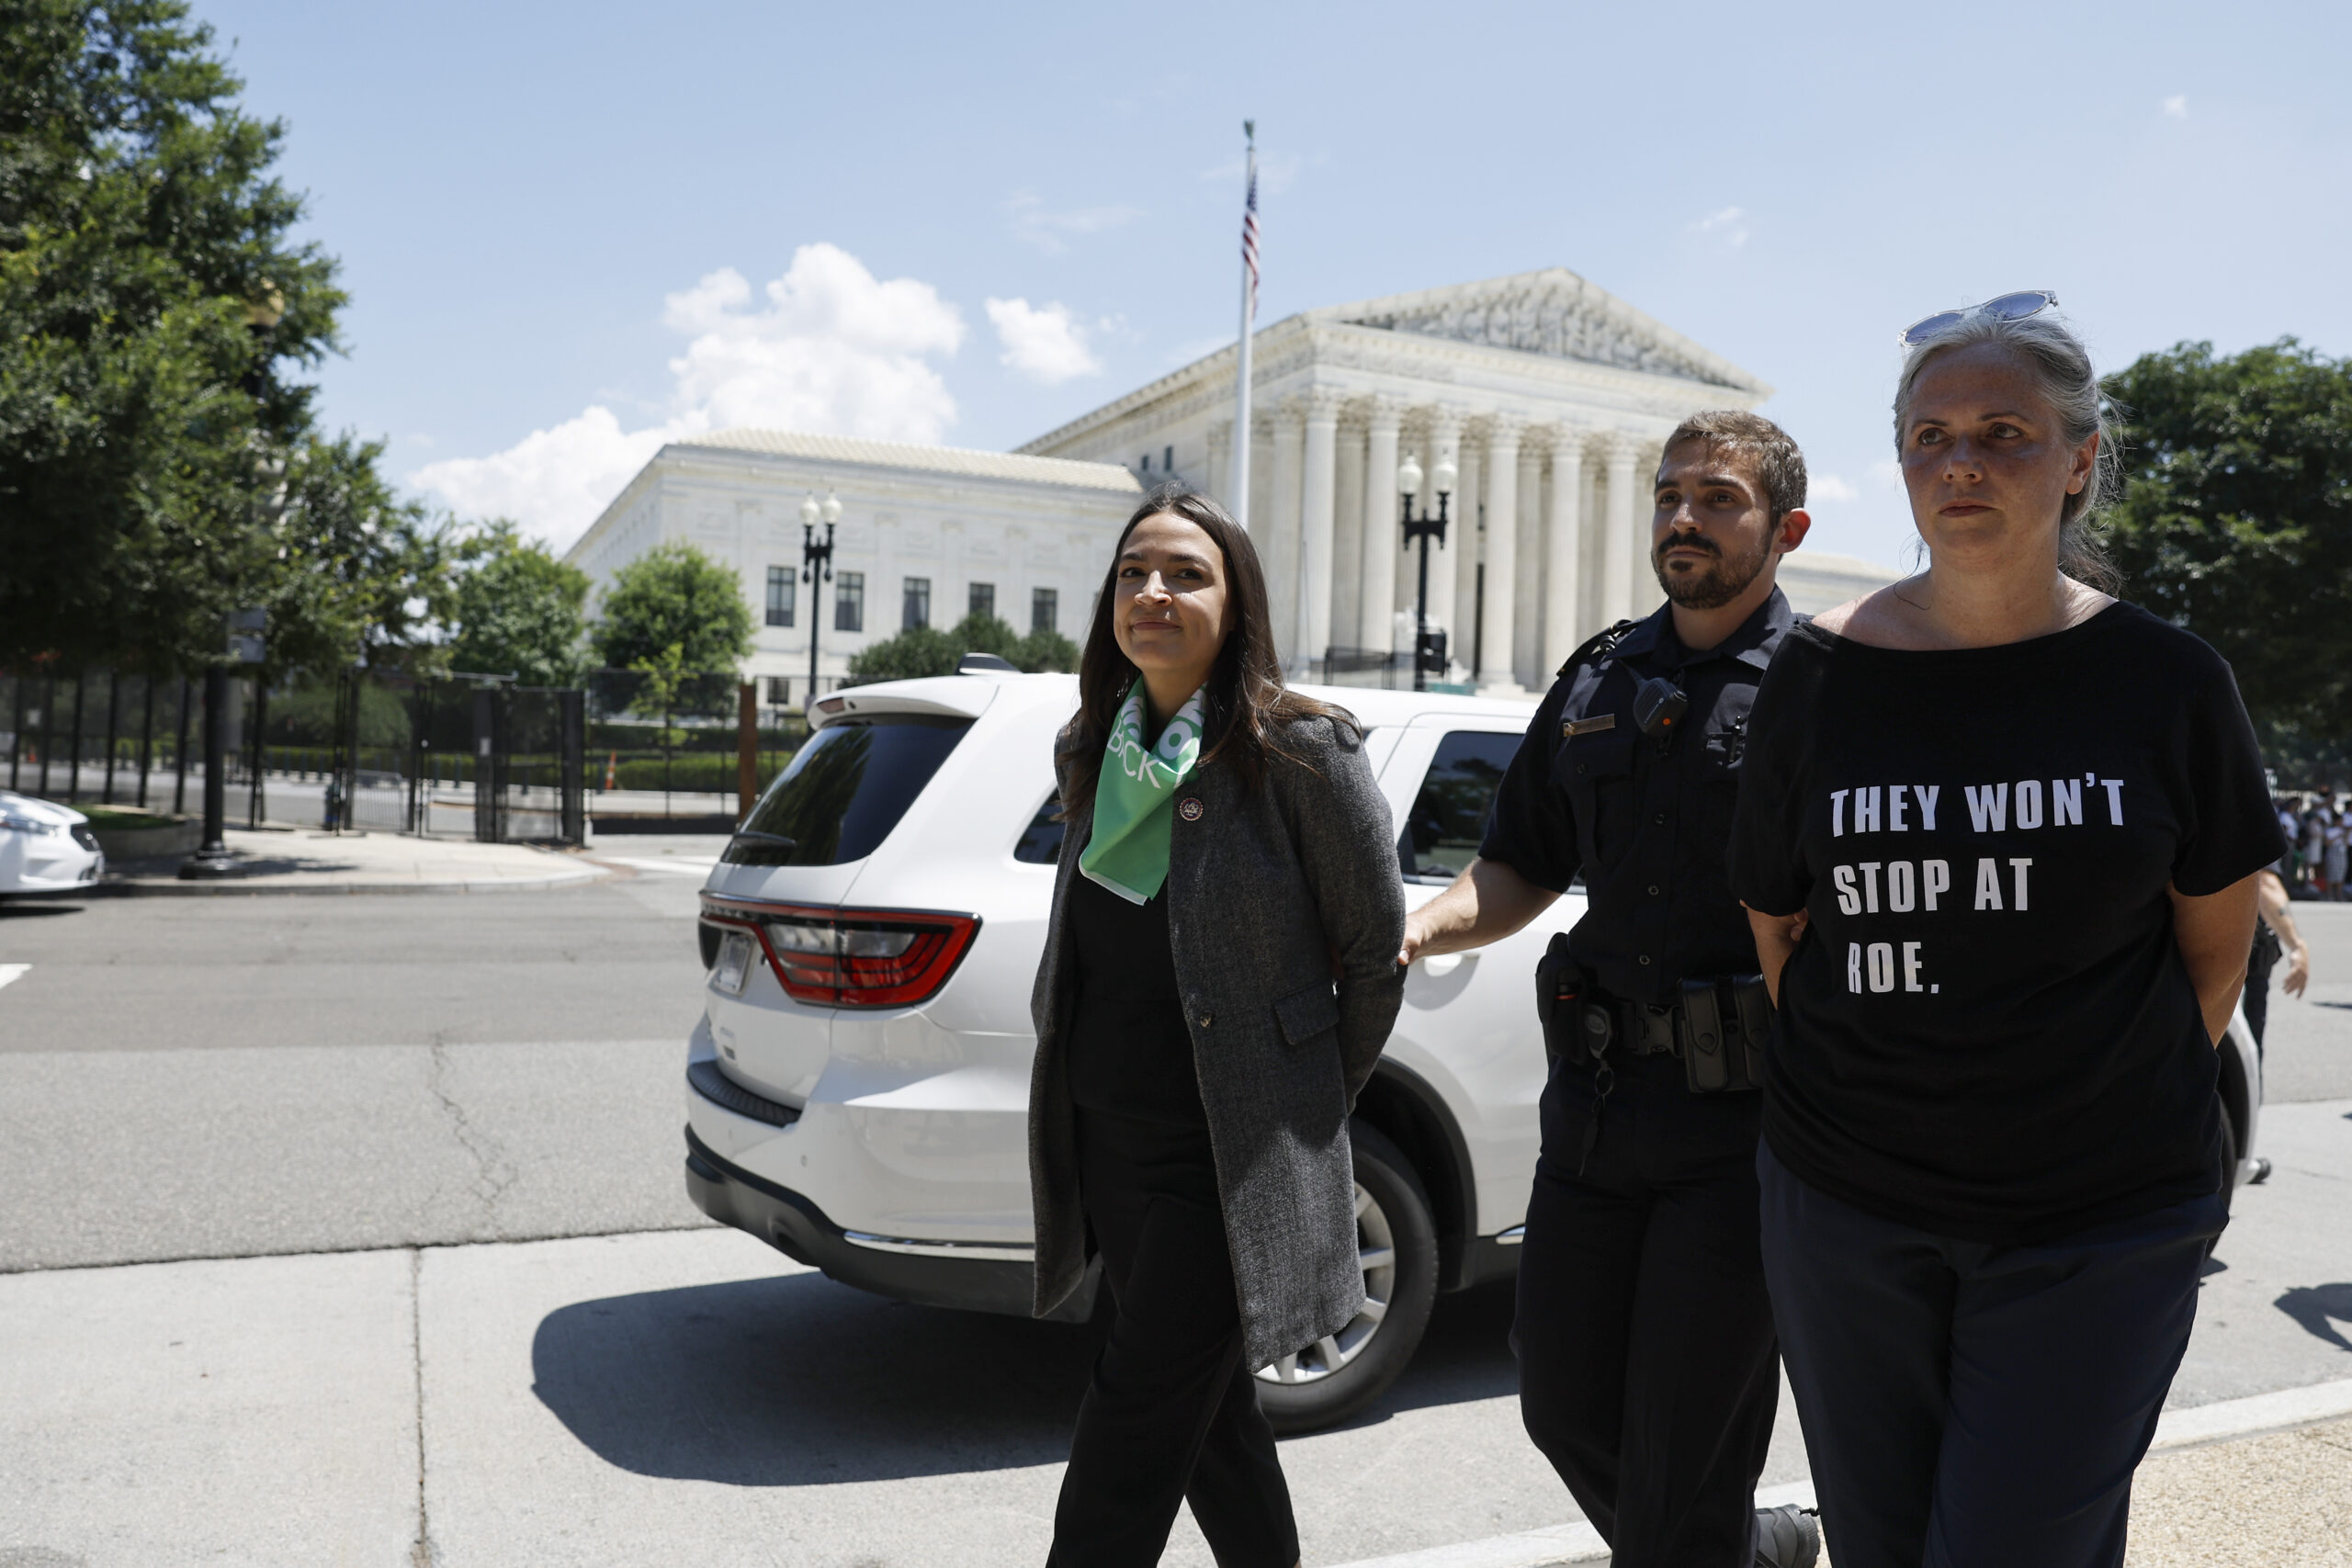 Rep. Alexandria Ocasio-Cortez (D-NY) is detained by U.S. Capitol Police Officers after participating in a sit in with activists from Center for Popular Democracy Action (CPDA) in front of the U.S. Supreme Court Building on July 19, 2022.